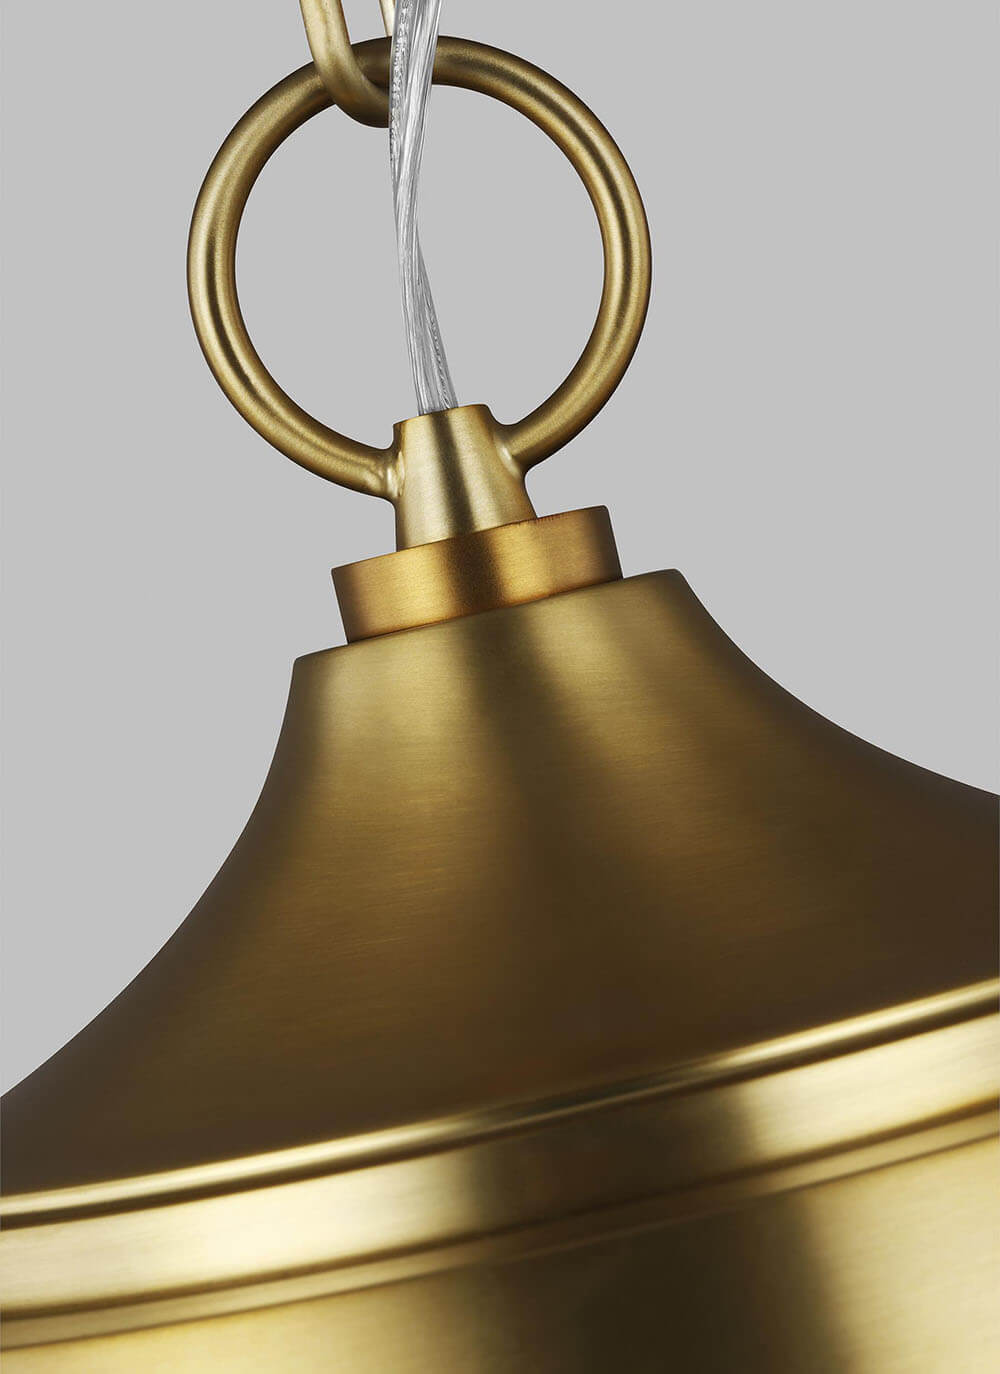 Burnished brass ring detail attachment on a globe kitchen pendant.